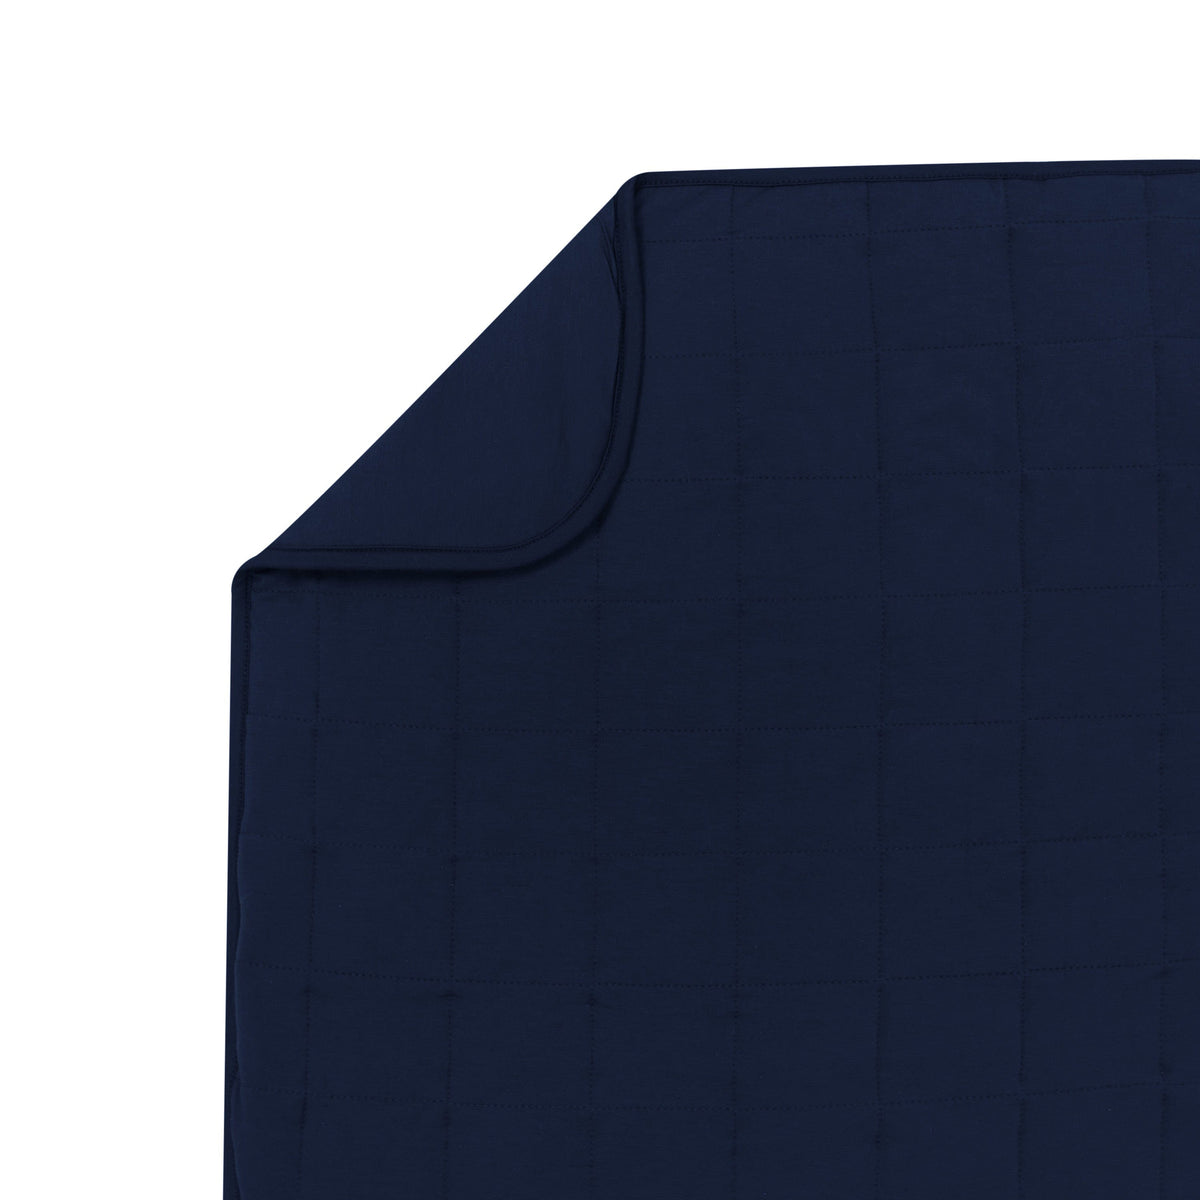 Kyte Baby Adult Quilted Twin Blanket in Navy Blue 2.5